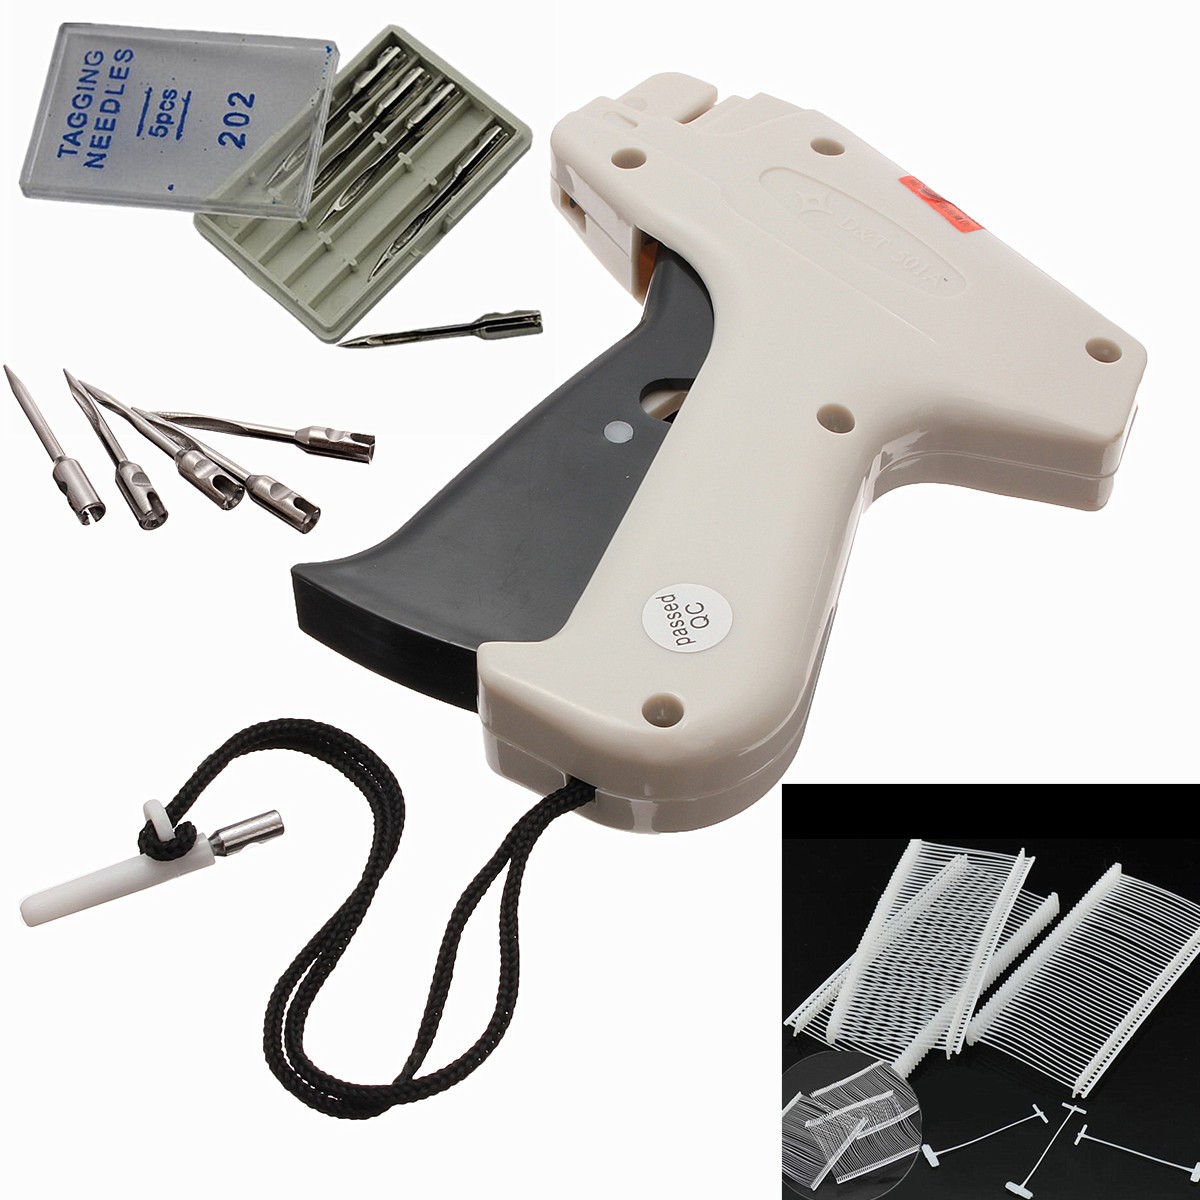 Clothes-Garment-Price-Label-Tagging-Tag-Gun-Machine-with-1000-Barbs-and-5-Steel-Needles-1067626-1